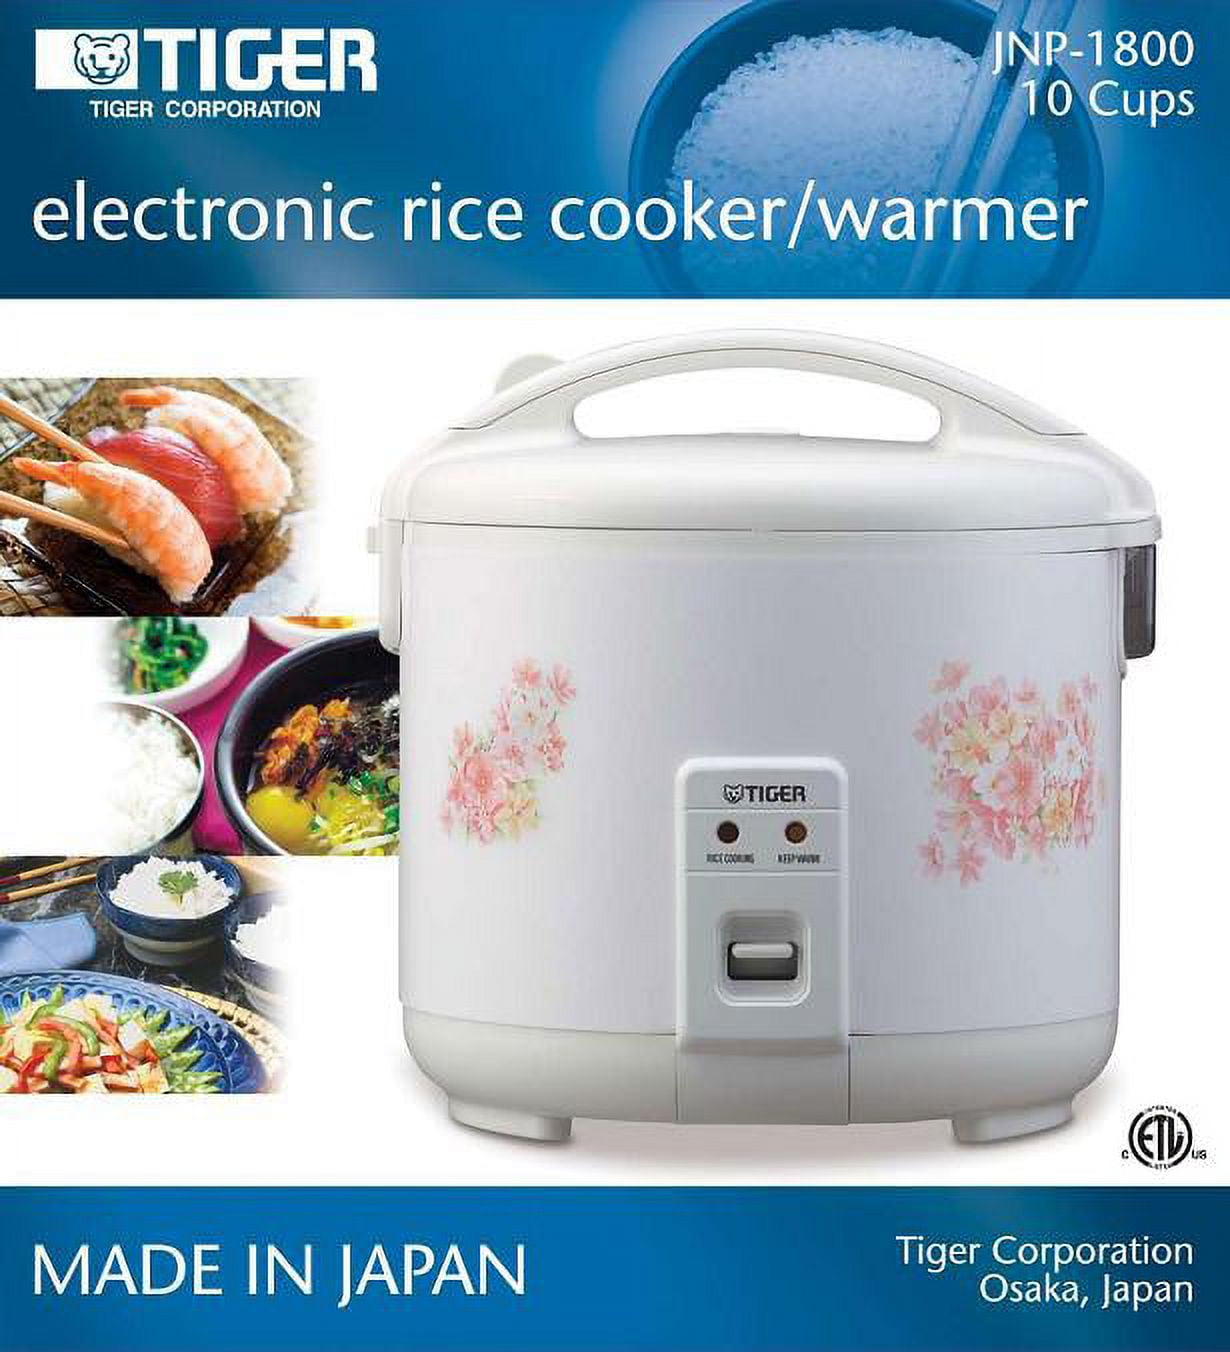 Tiger JNP-1800 10-Cup Floral White Rice Cooker  Warmer